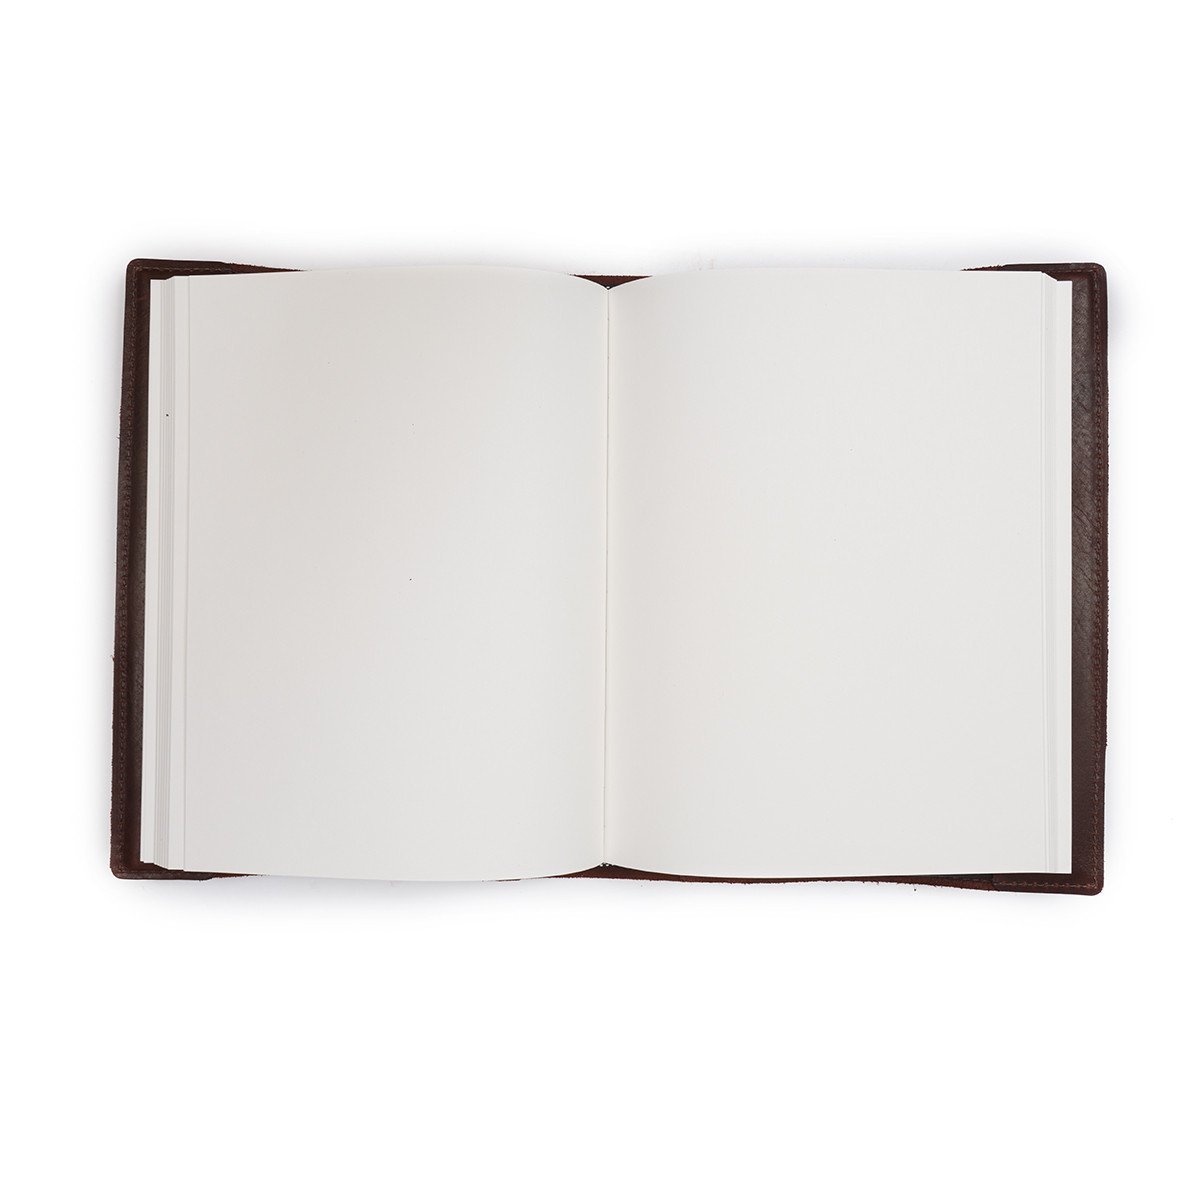 10 X Display Book A4 Refillable 20 Page BULK BUY